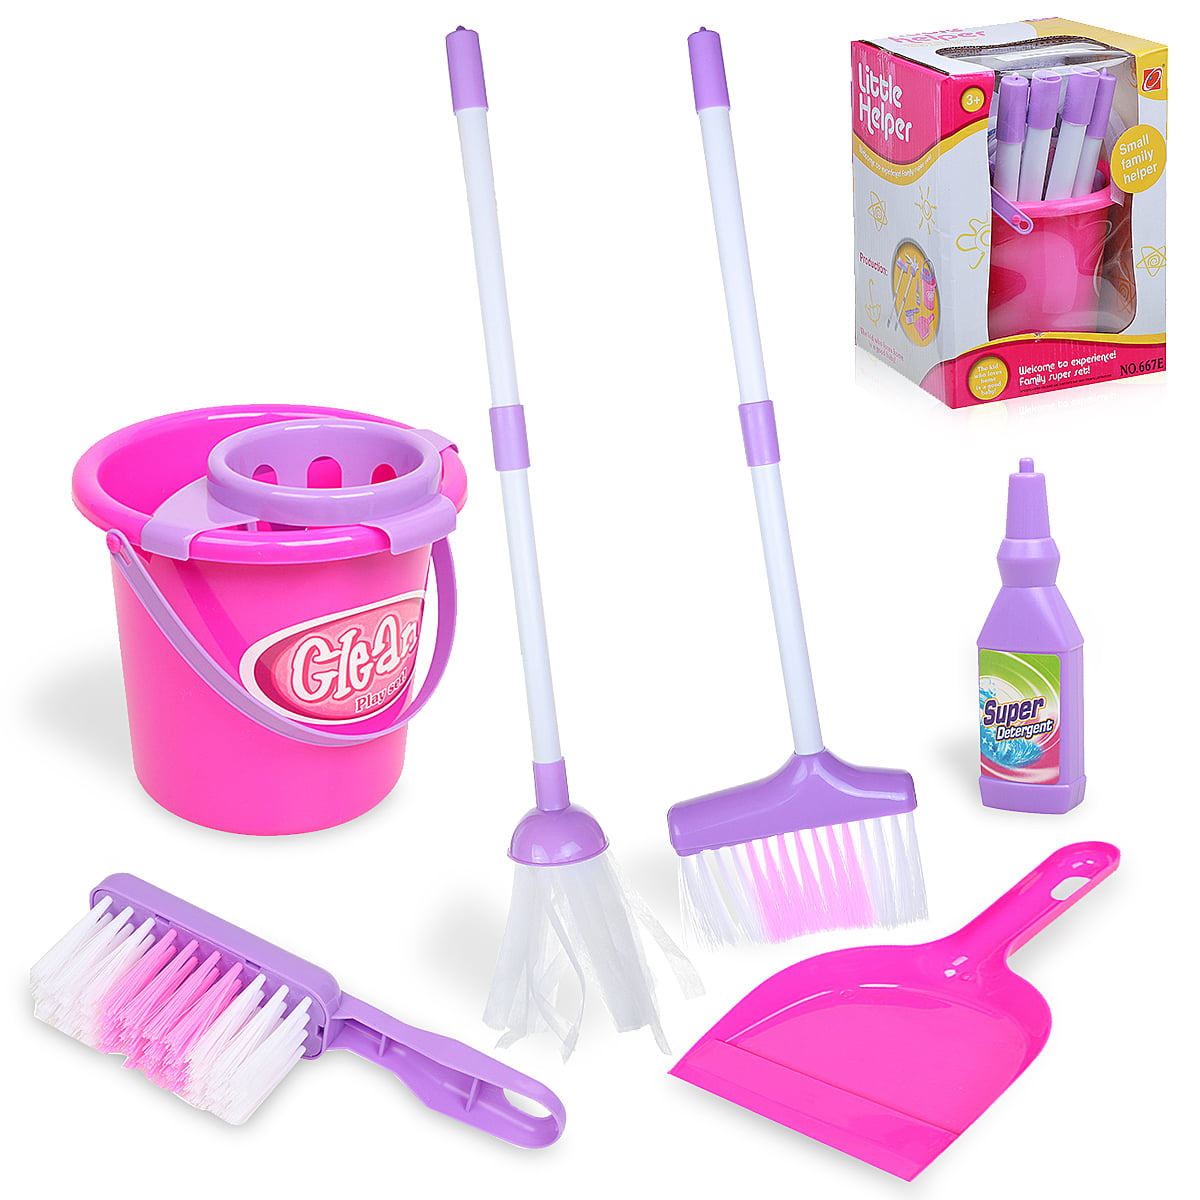 Kids Children's Cleaning Role Play Toy Mop & Bucket Set Red Girls Xmas Gift New 